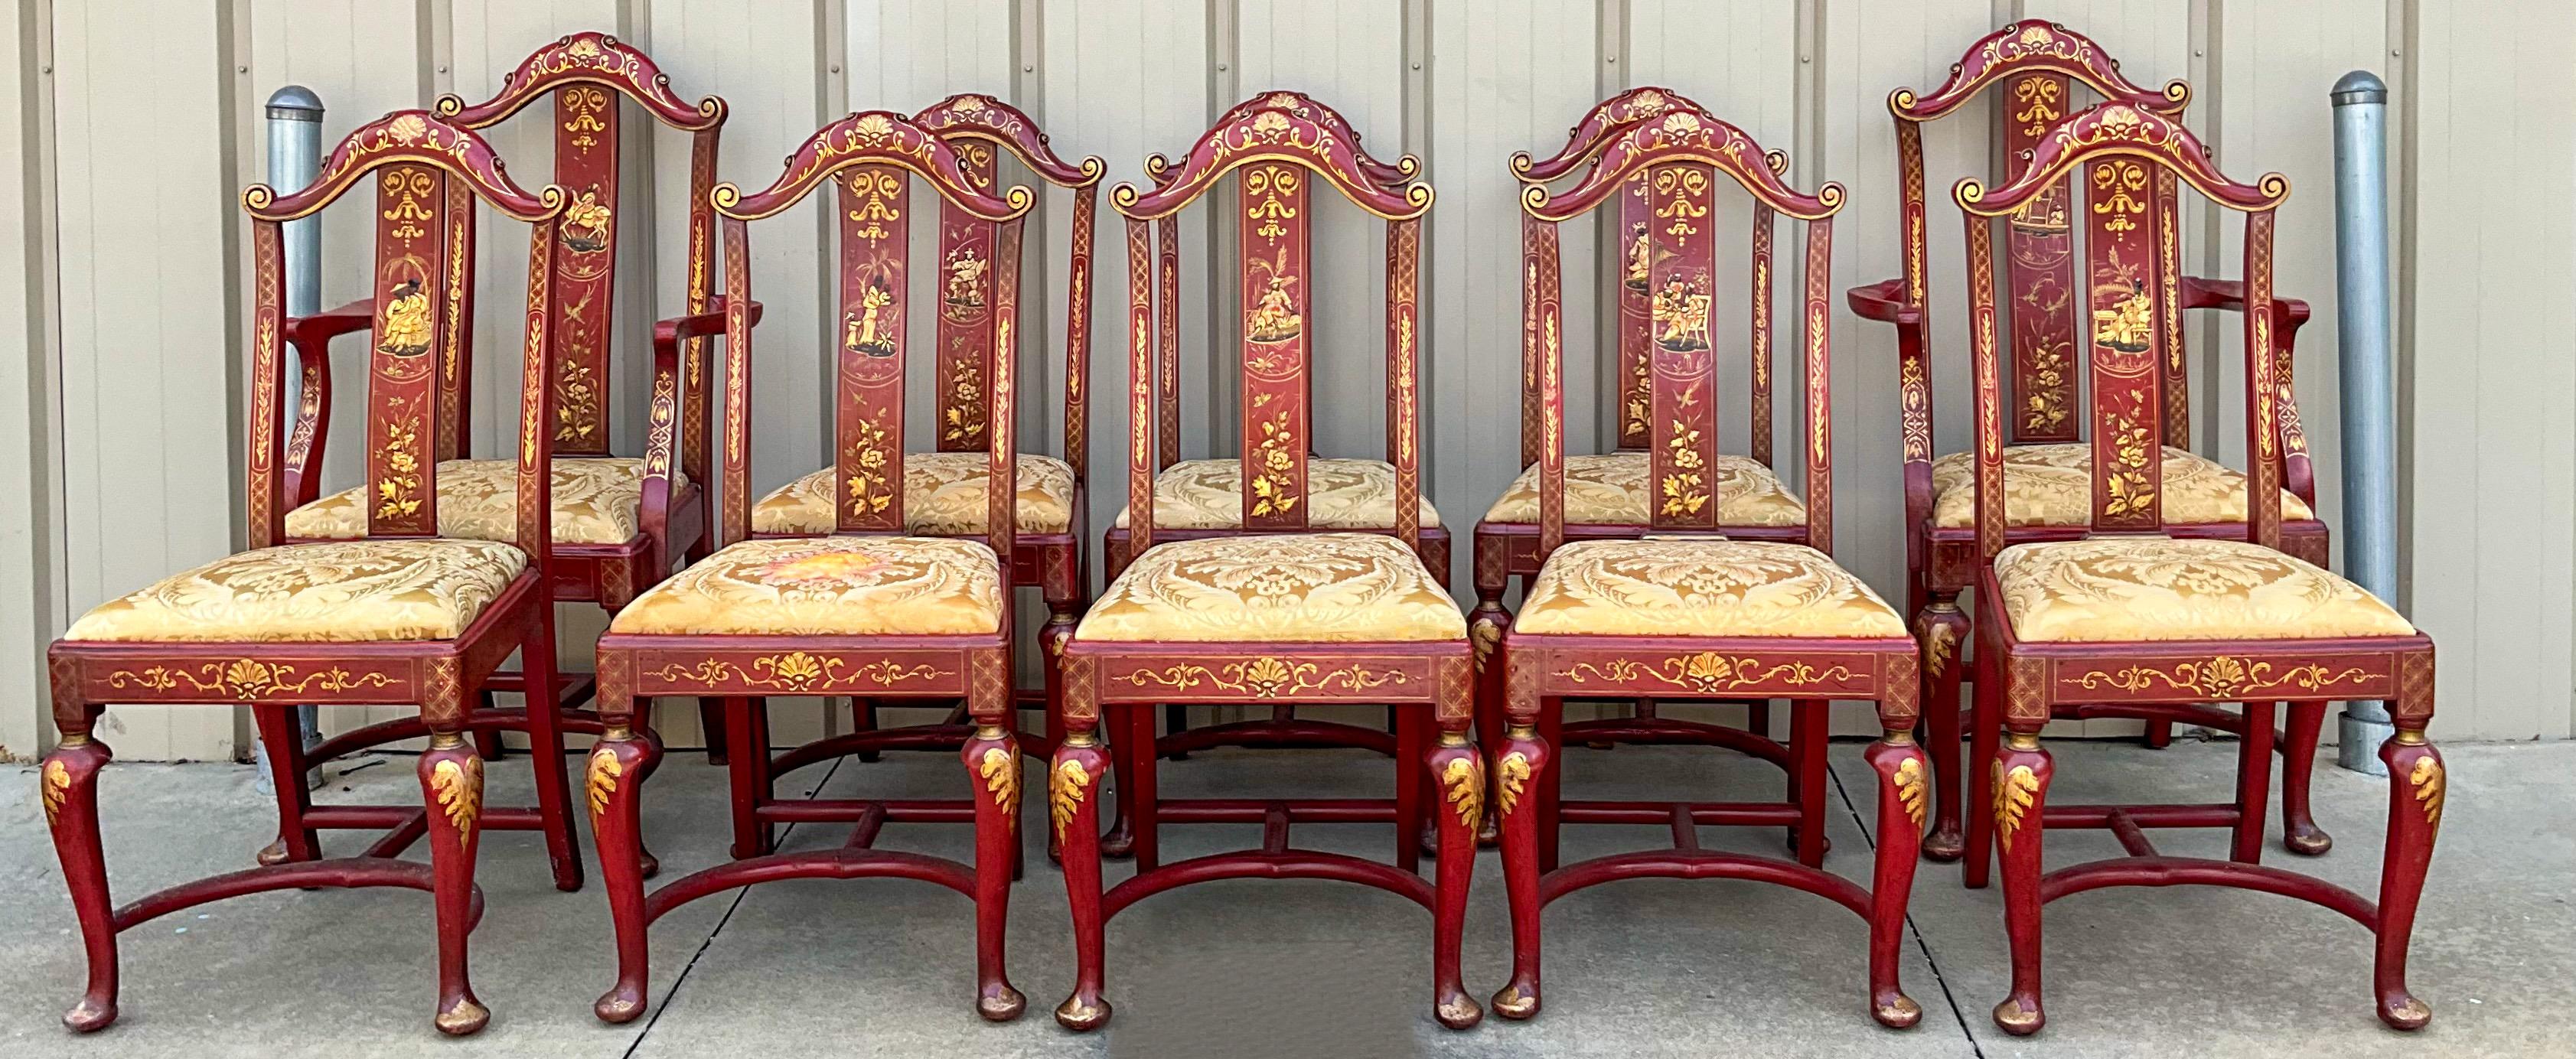 Early English Queen Anne Style Red & Gilt Chinoiserie Dining Chairs -S/10 For Sale 9